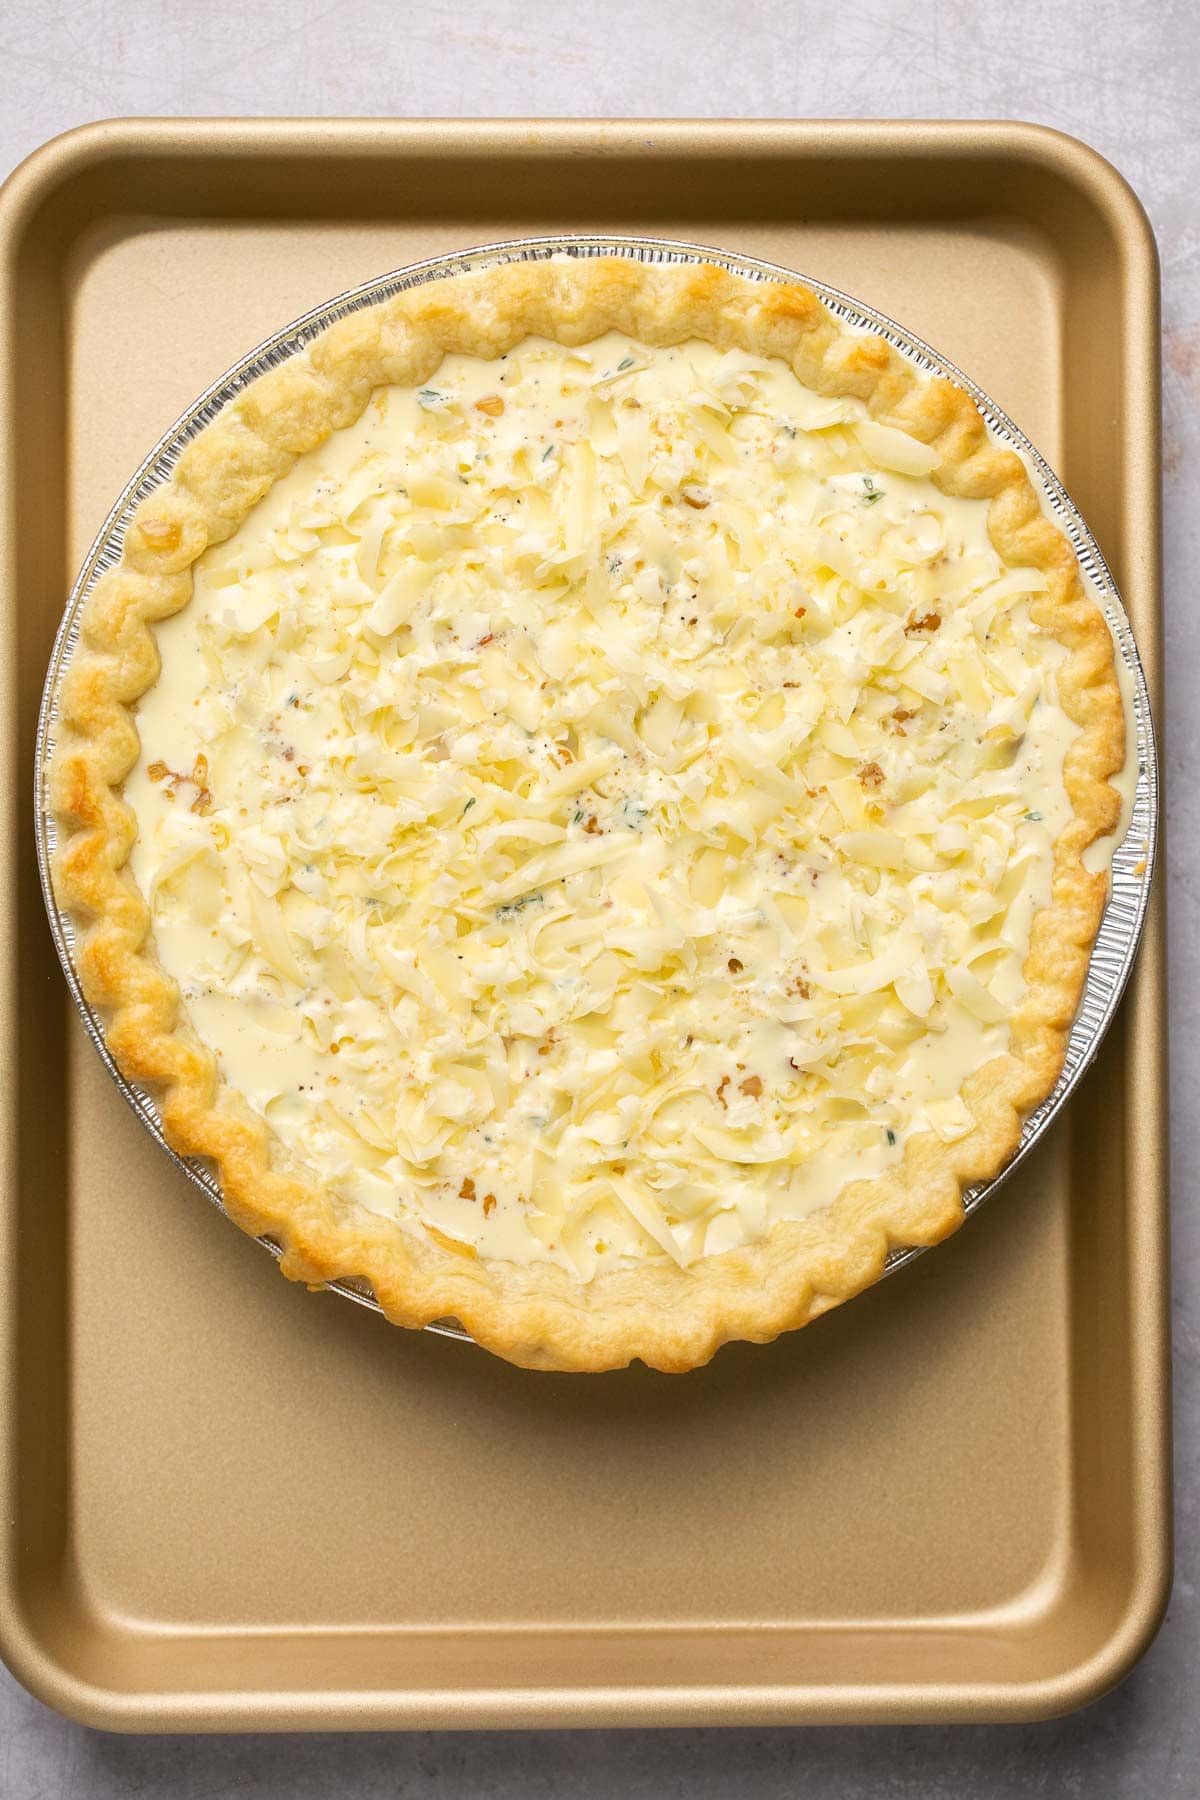 Quiche sprinkled with cheese before baking.